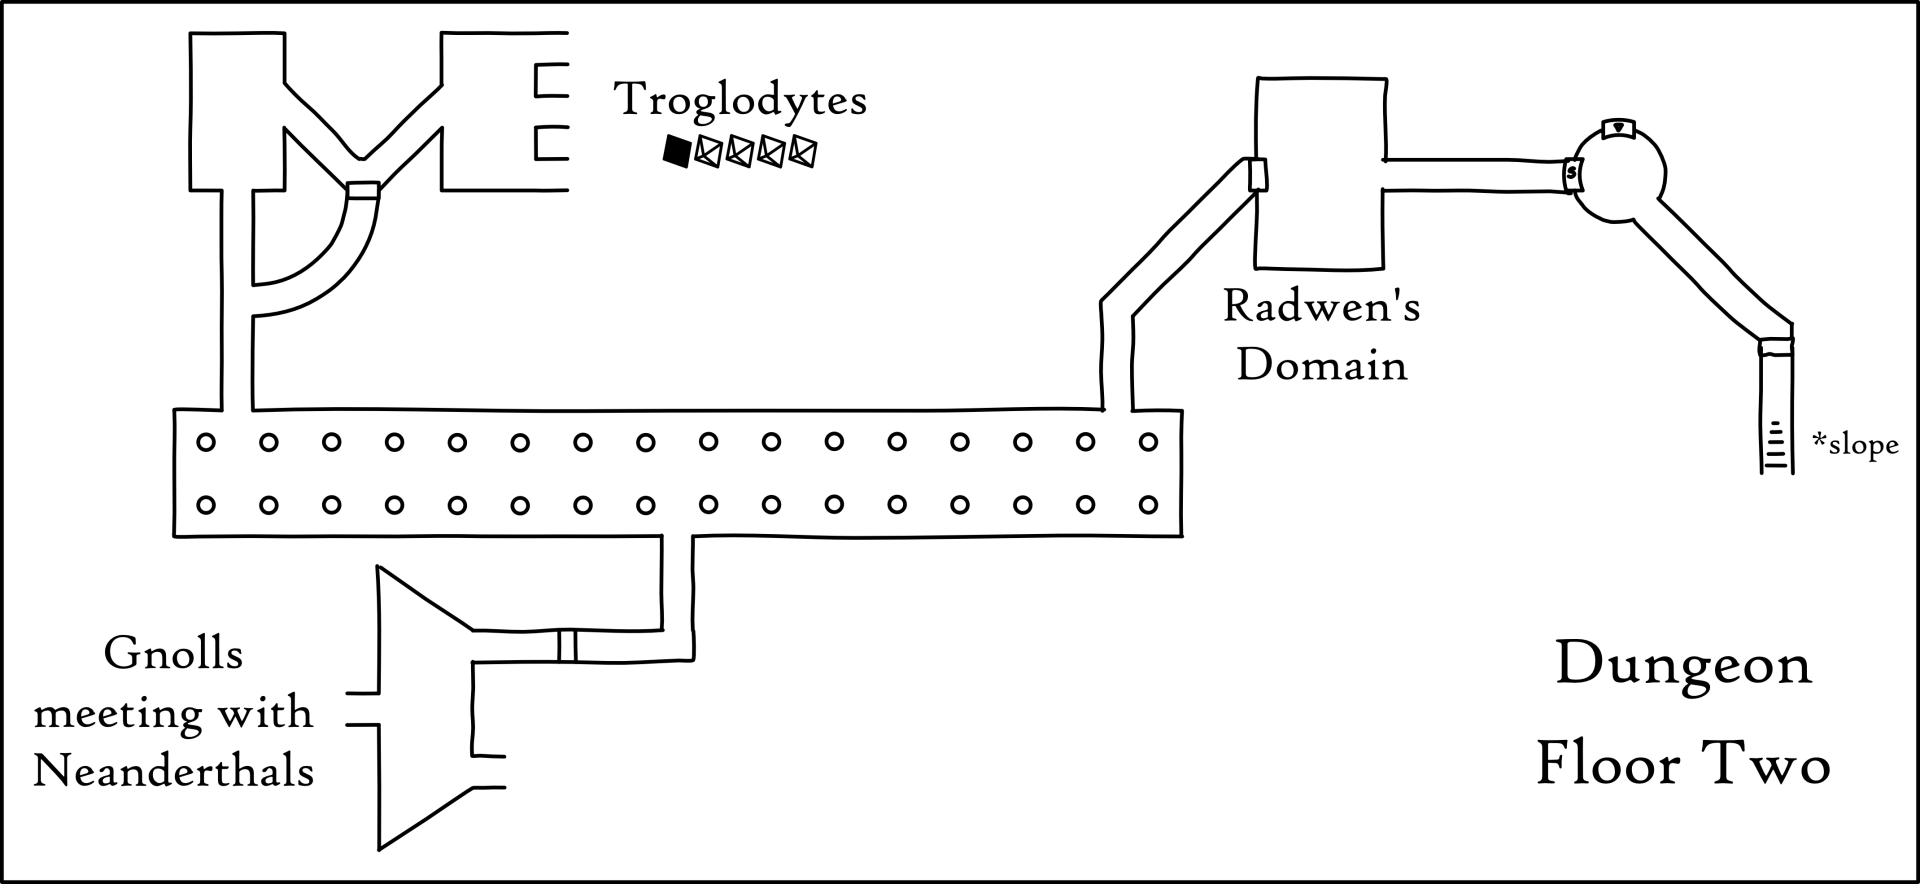 A digitally hand-drawn map of the second floor of the dungeon, updated from last session. Labelled to indicate the location of Radwen's domain, the gnolls/neanderthals, and the troglodytes.